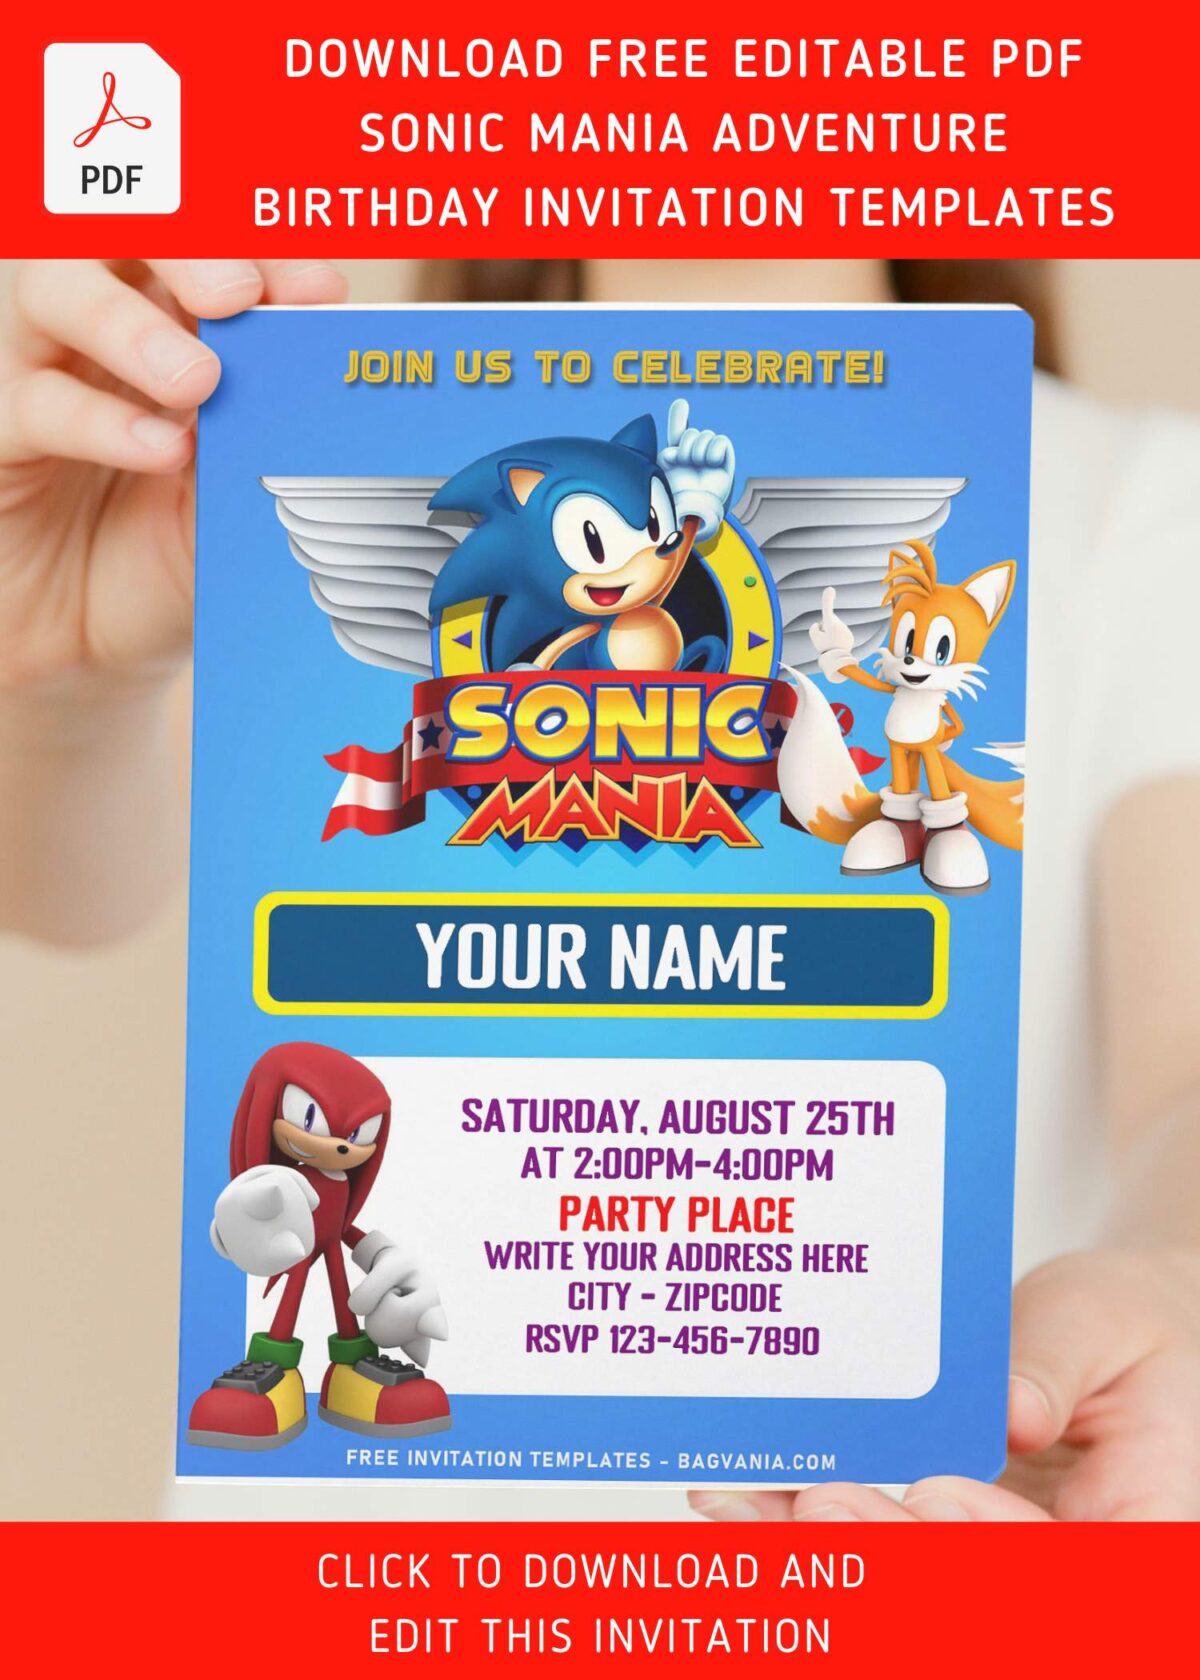 (Free Editable PDF) Super Cool Classic Sonic The Hedgehog Birthday Invitation Templates with cute blue background